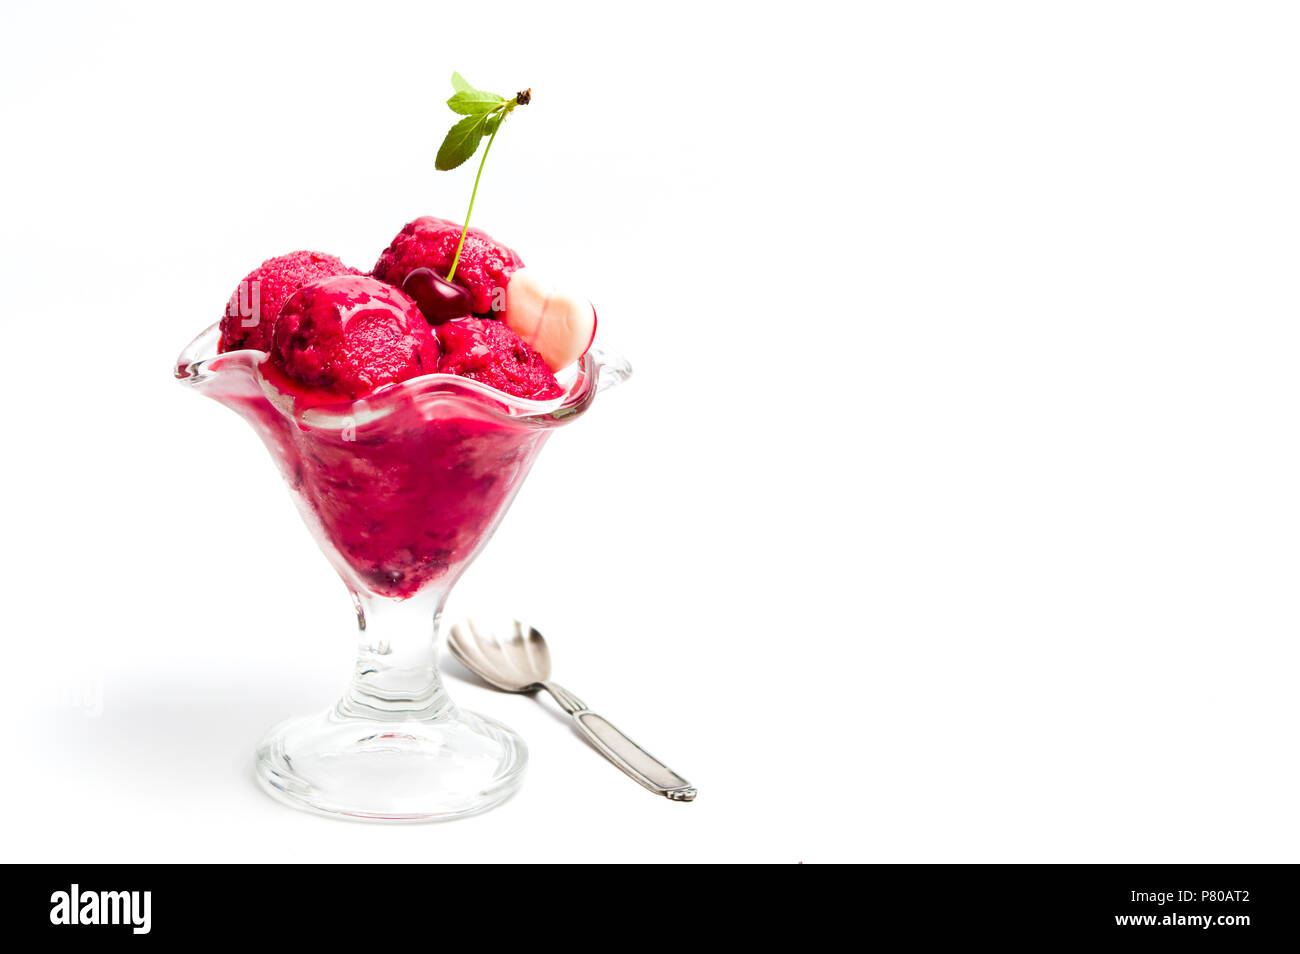 Cherry ice cream scoops in a cup on white Stock Photo